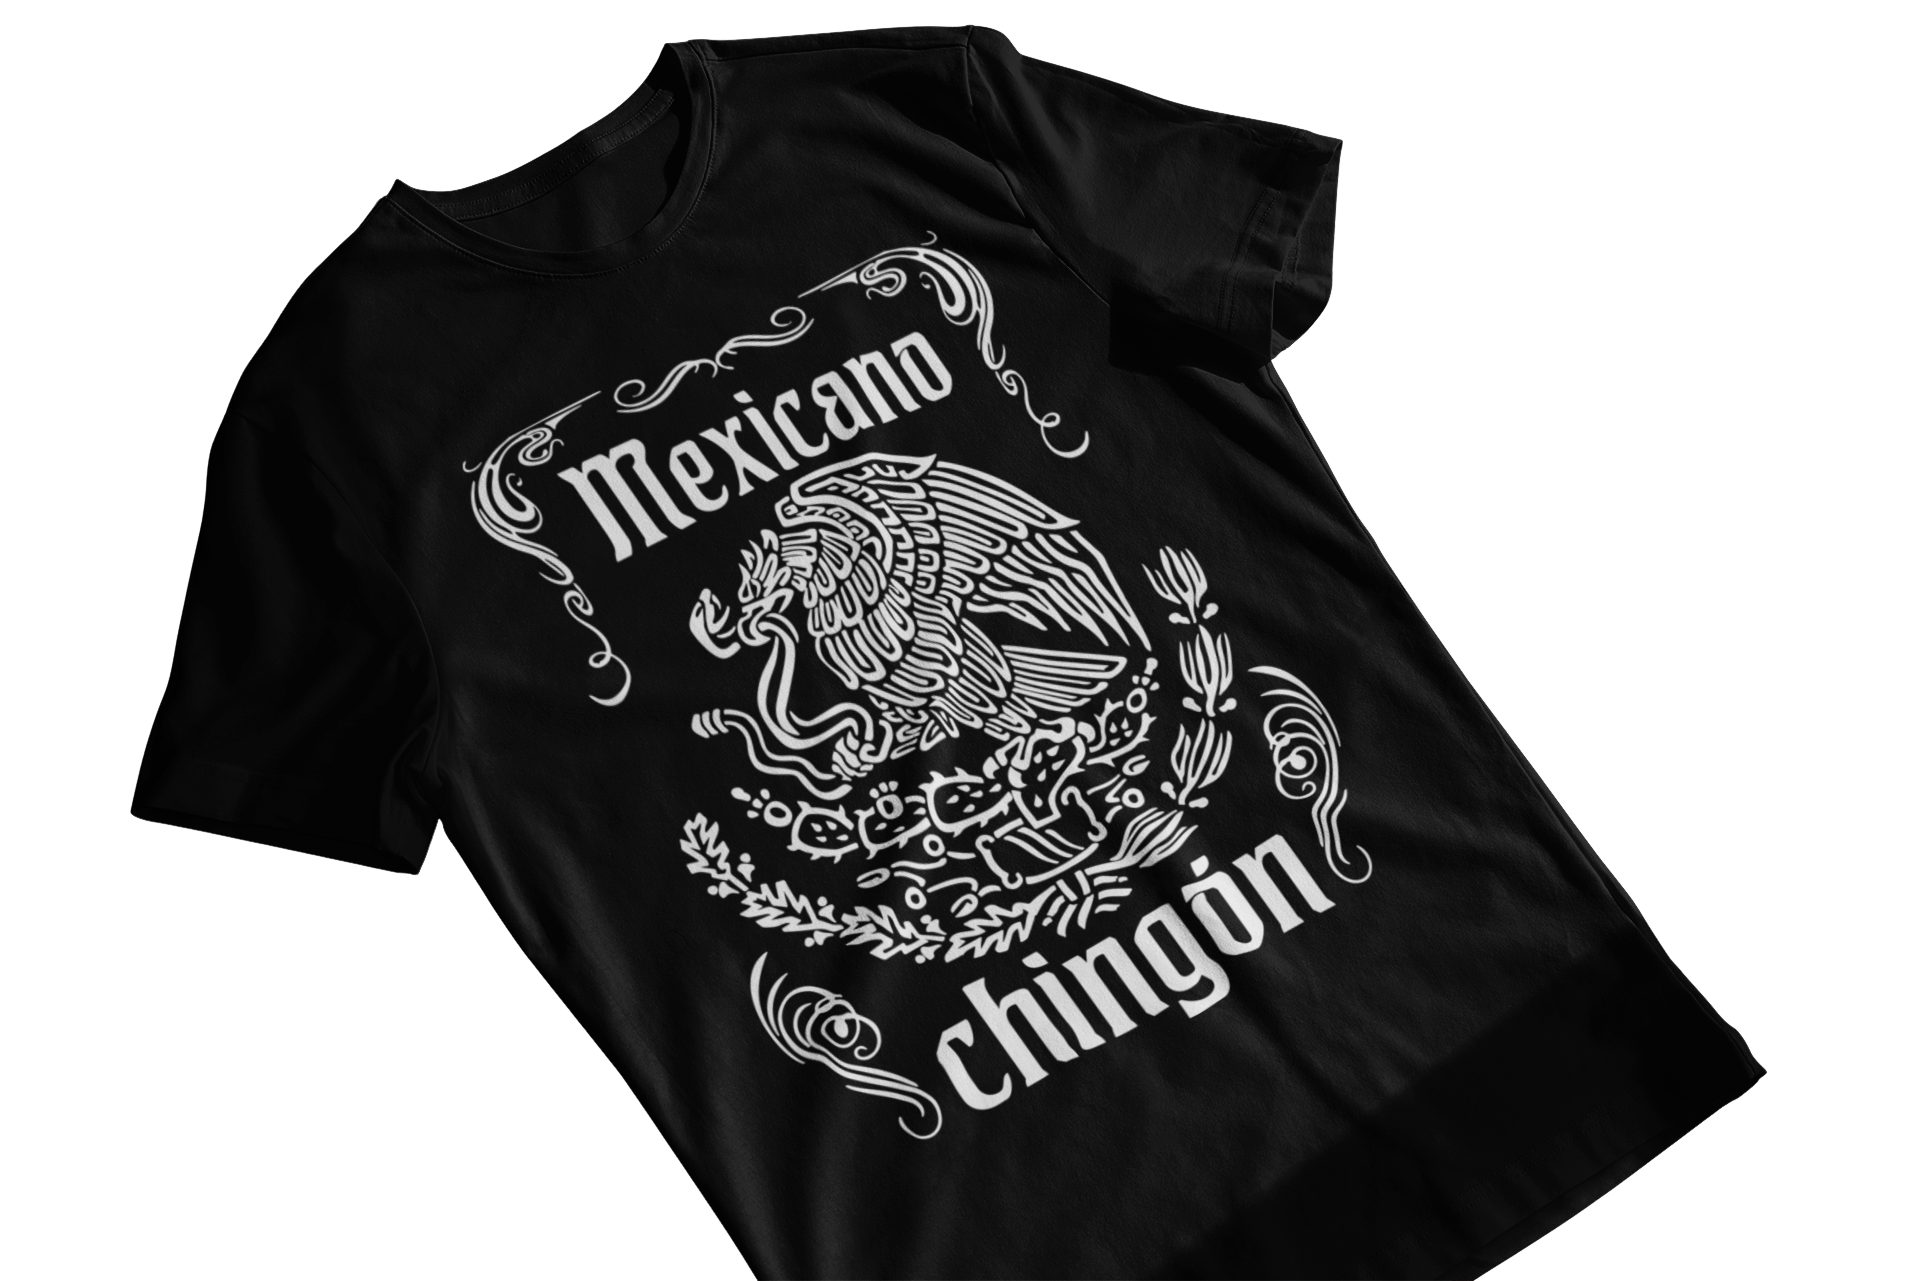 Mexica Black t-shirt with a bold graphic of the Mexican eagle, symbolizing Mexican pride and strength with the text 'Mexican Chingon'.